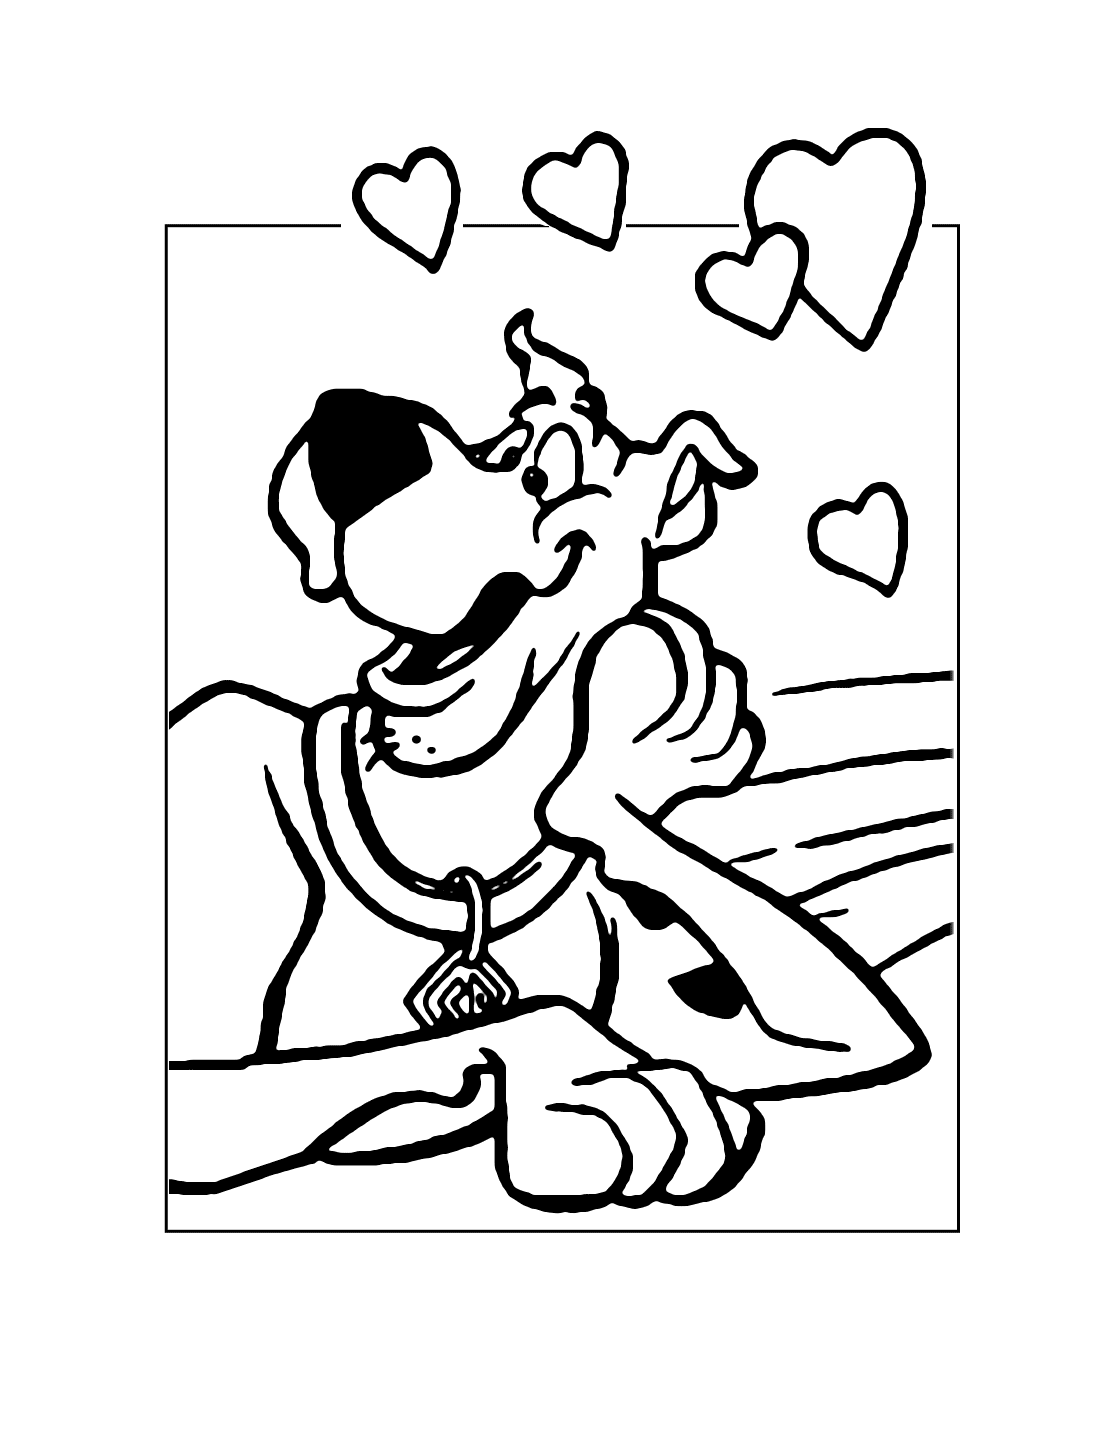 Scooby Doo Hearts Coloring Page